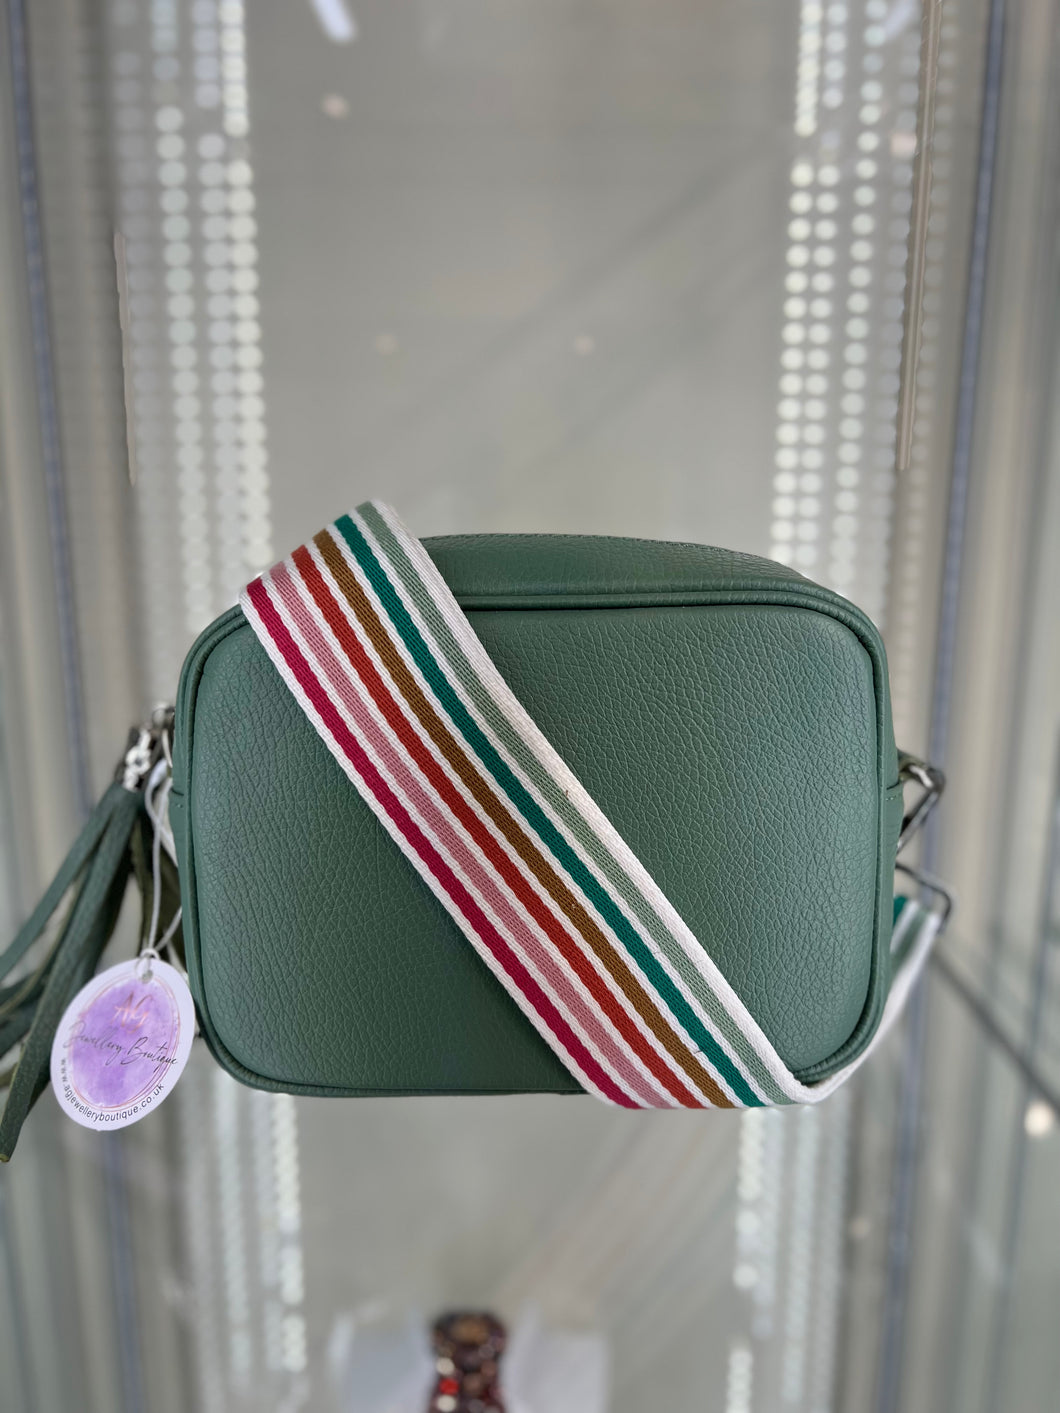 Real Leather Mint Handbag with Striped Strap